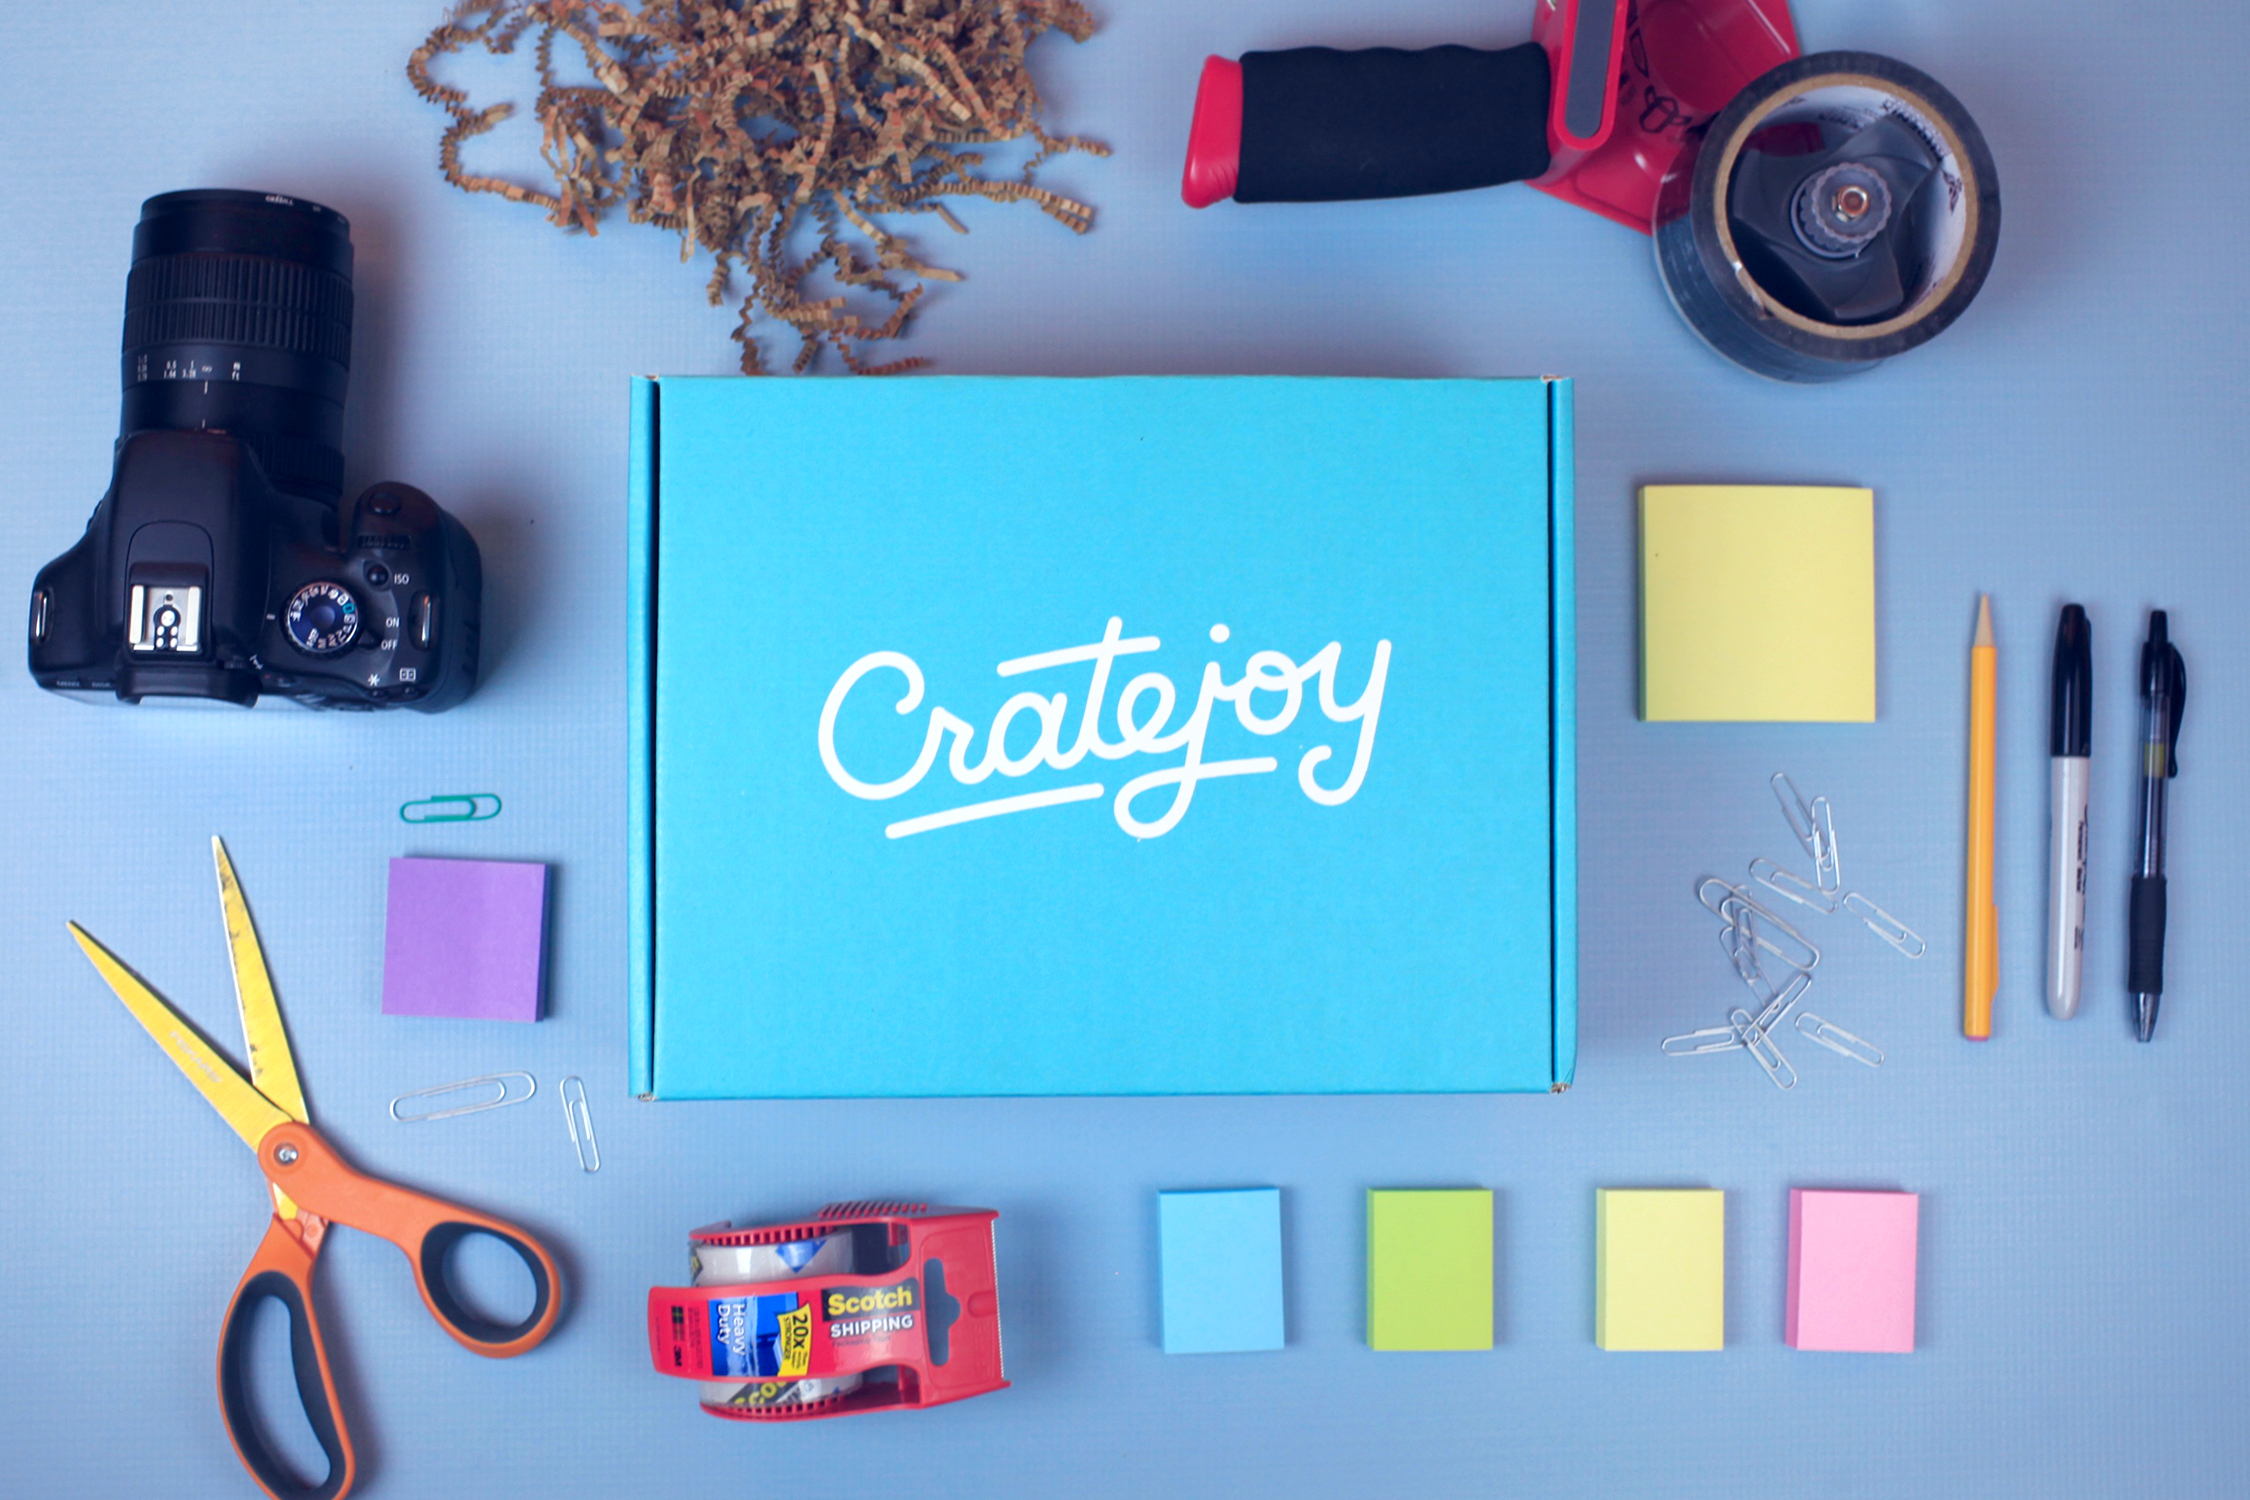 Cratejoy Coupon: Get 25% OFF Your First Box When You Prepay a 3, 6 or 12 Month Subscription